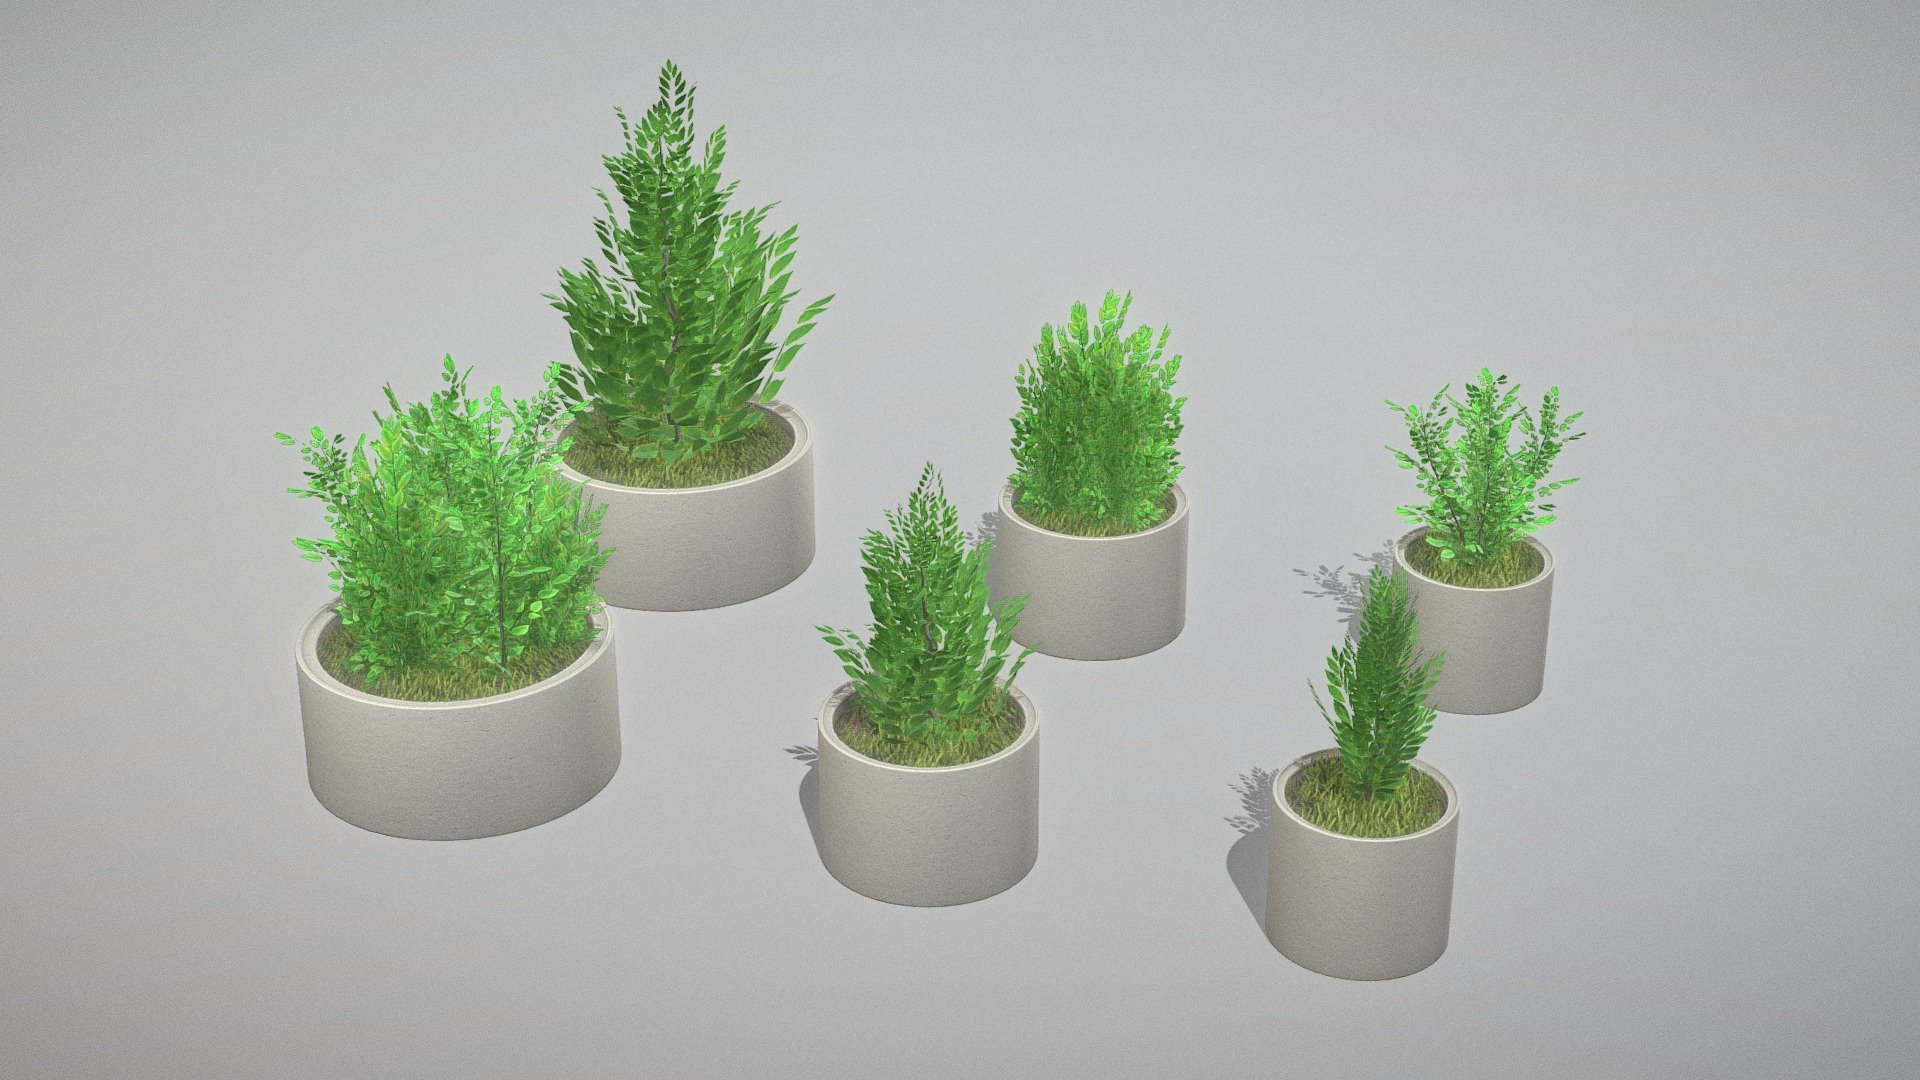 Here are some concrete pipe pots with bushes, version 1 with grass ground.


Parts:



Object Name - Concrete_pot_800mm_Bush_1-1 

Dimensions -  0.838m x 0.807m x 1.780m

Vertices = 1507

Polygons = 1803






Object Name - Concrete_pot_800mm_Bush_2-1 

Dimensions -  1.011m x 1.068m x 1.665m

Vertices = 2559

Polygons = 2317






Object Name - Concrete_pot_1000mm_Bush_1-1 

Dimensions -  1.290m x 1.245m x 2.013m

Vertices = 2401

Polygons = 2563






Object Name - Concrete_pot_1000mm_Bush_2-1 

Dimensions -  1.001m x 1.038m x 1.933m

Vertices = 1613

Polygons = 2003






Object Name - Concrete_pot_1500mm_Bush_1-1 

Dimensions -  1.571m x 1.547m x 2.115m

Vertices = 4489

Polygons = 4184






Object Name - Concrete_pot_1500mm_Bush_2-1 

Dimensions -  1.966m x 2.029m x 2.912m

Vertices = 2645

Polygons = 2624



Modeled and textured by 3DHaupt in Blender-2.91 - Concrete Pipe Pots with Bushes 1 - Buy Royalty Free 3D model by VIS-All-3D (@VIS-All) 3d model